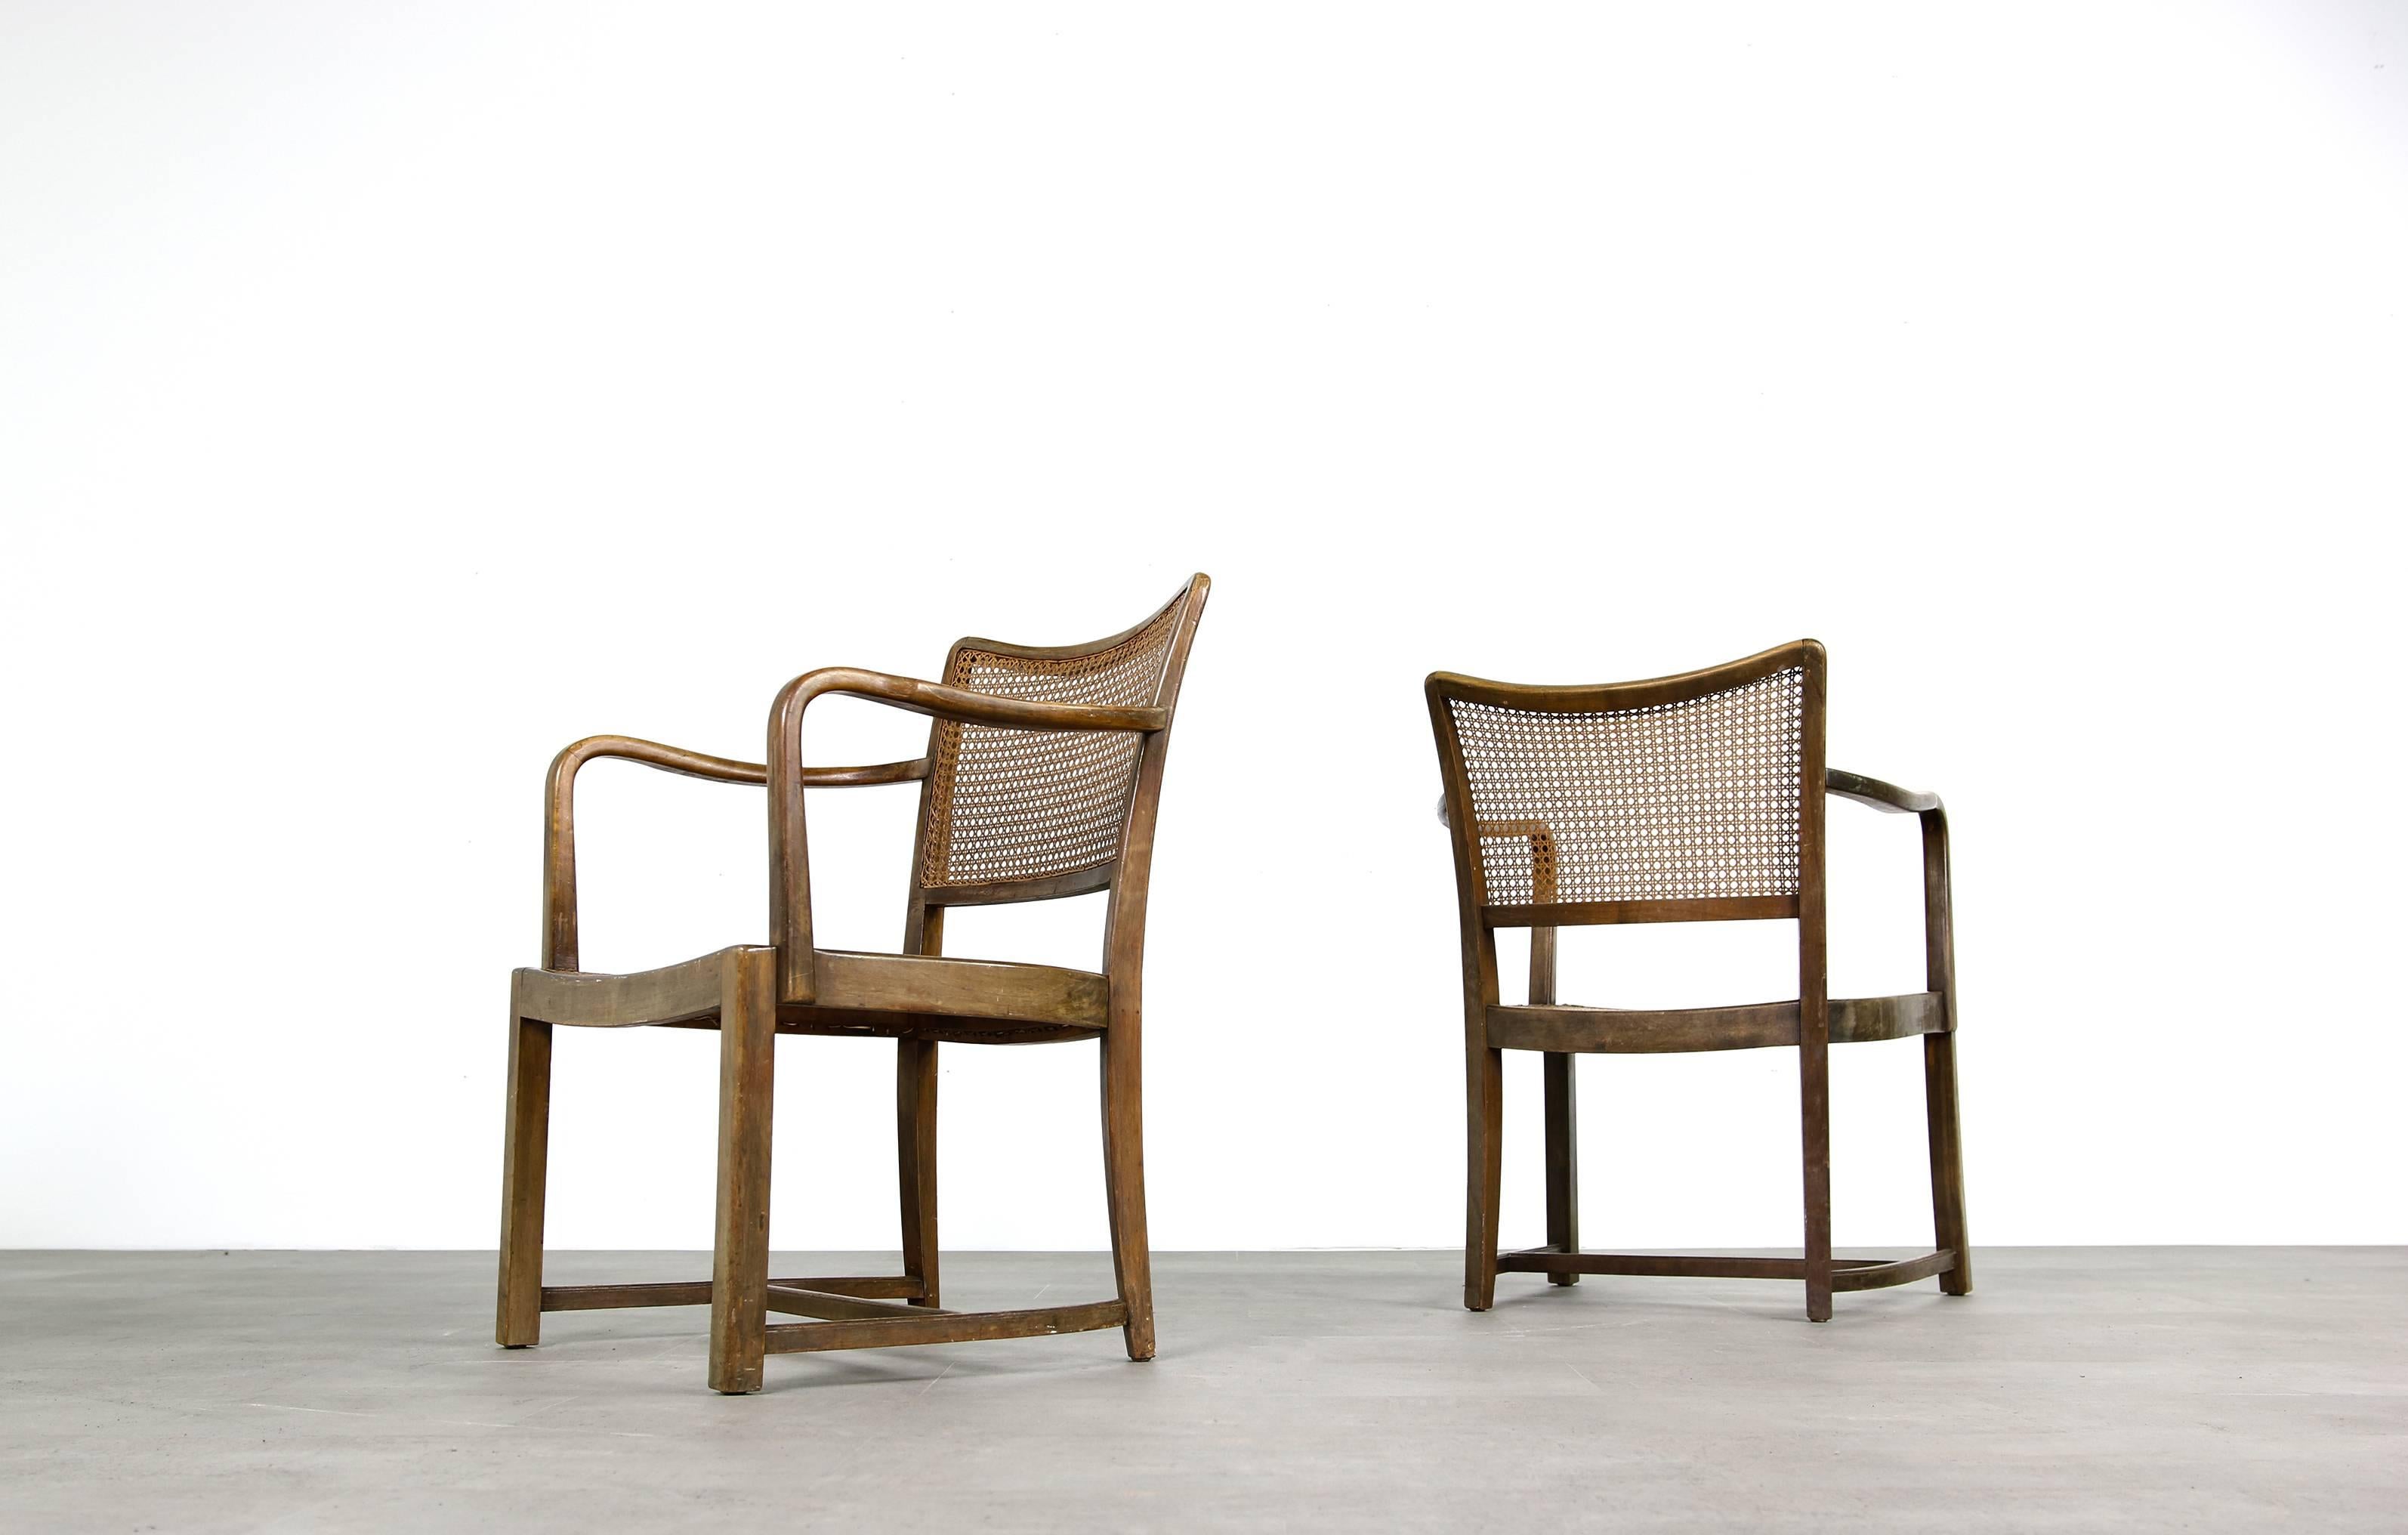 Pair of Vintage Midcentury Bentwood and Cane Chairs 1950s Post War Modern For Sale 2